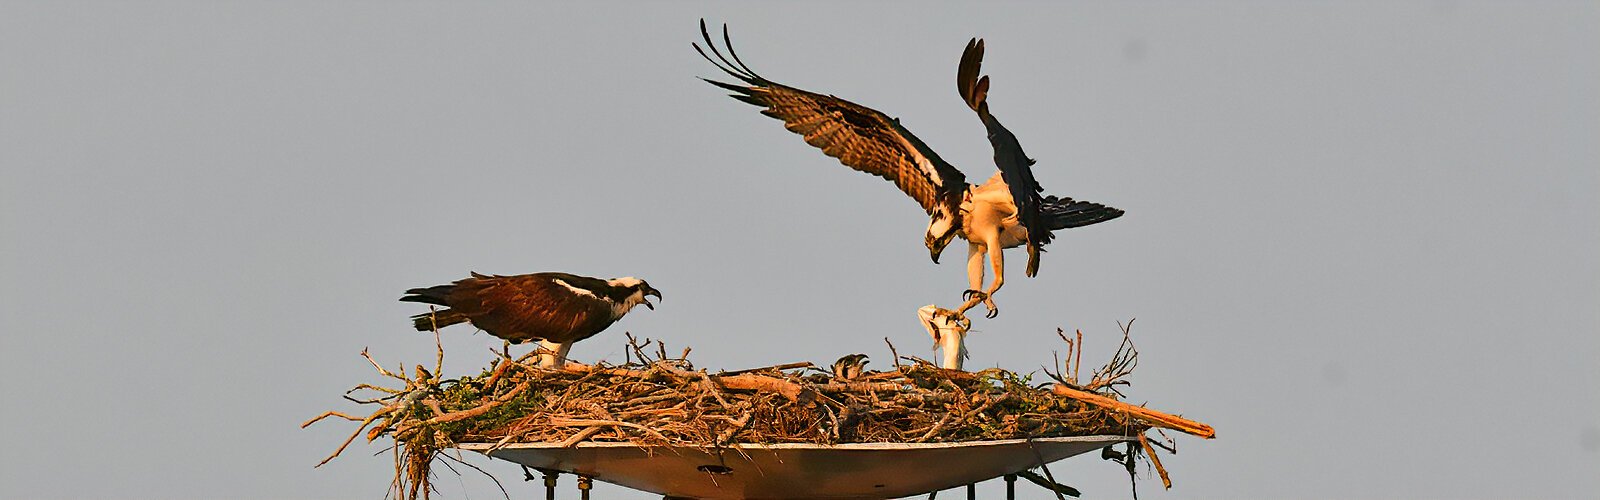 An osprey dad brings back a fish he caught in the bay to feed his chick, which is half-hidden in their large nest made of sticks and moss. If you see a sick or injured raptor, contact www.Raptorcenteroftampabay.org.